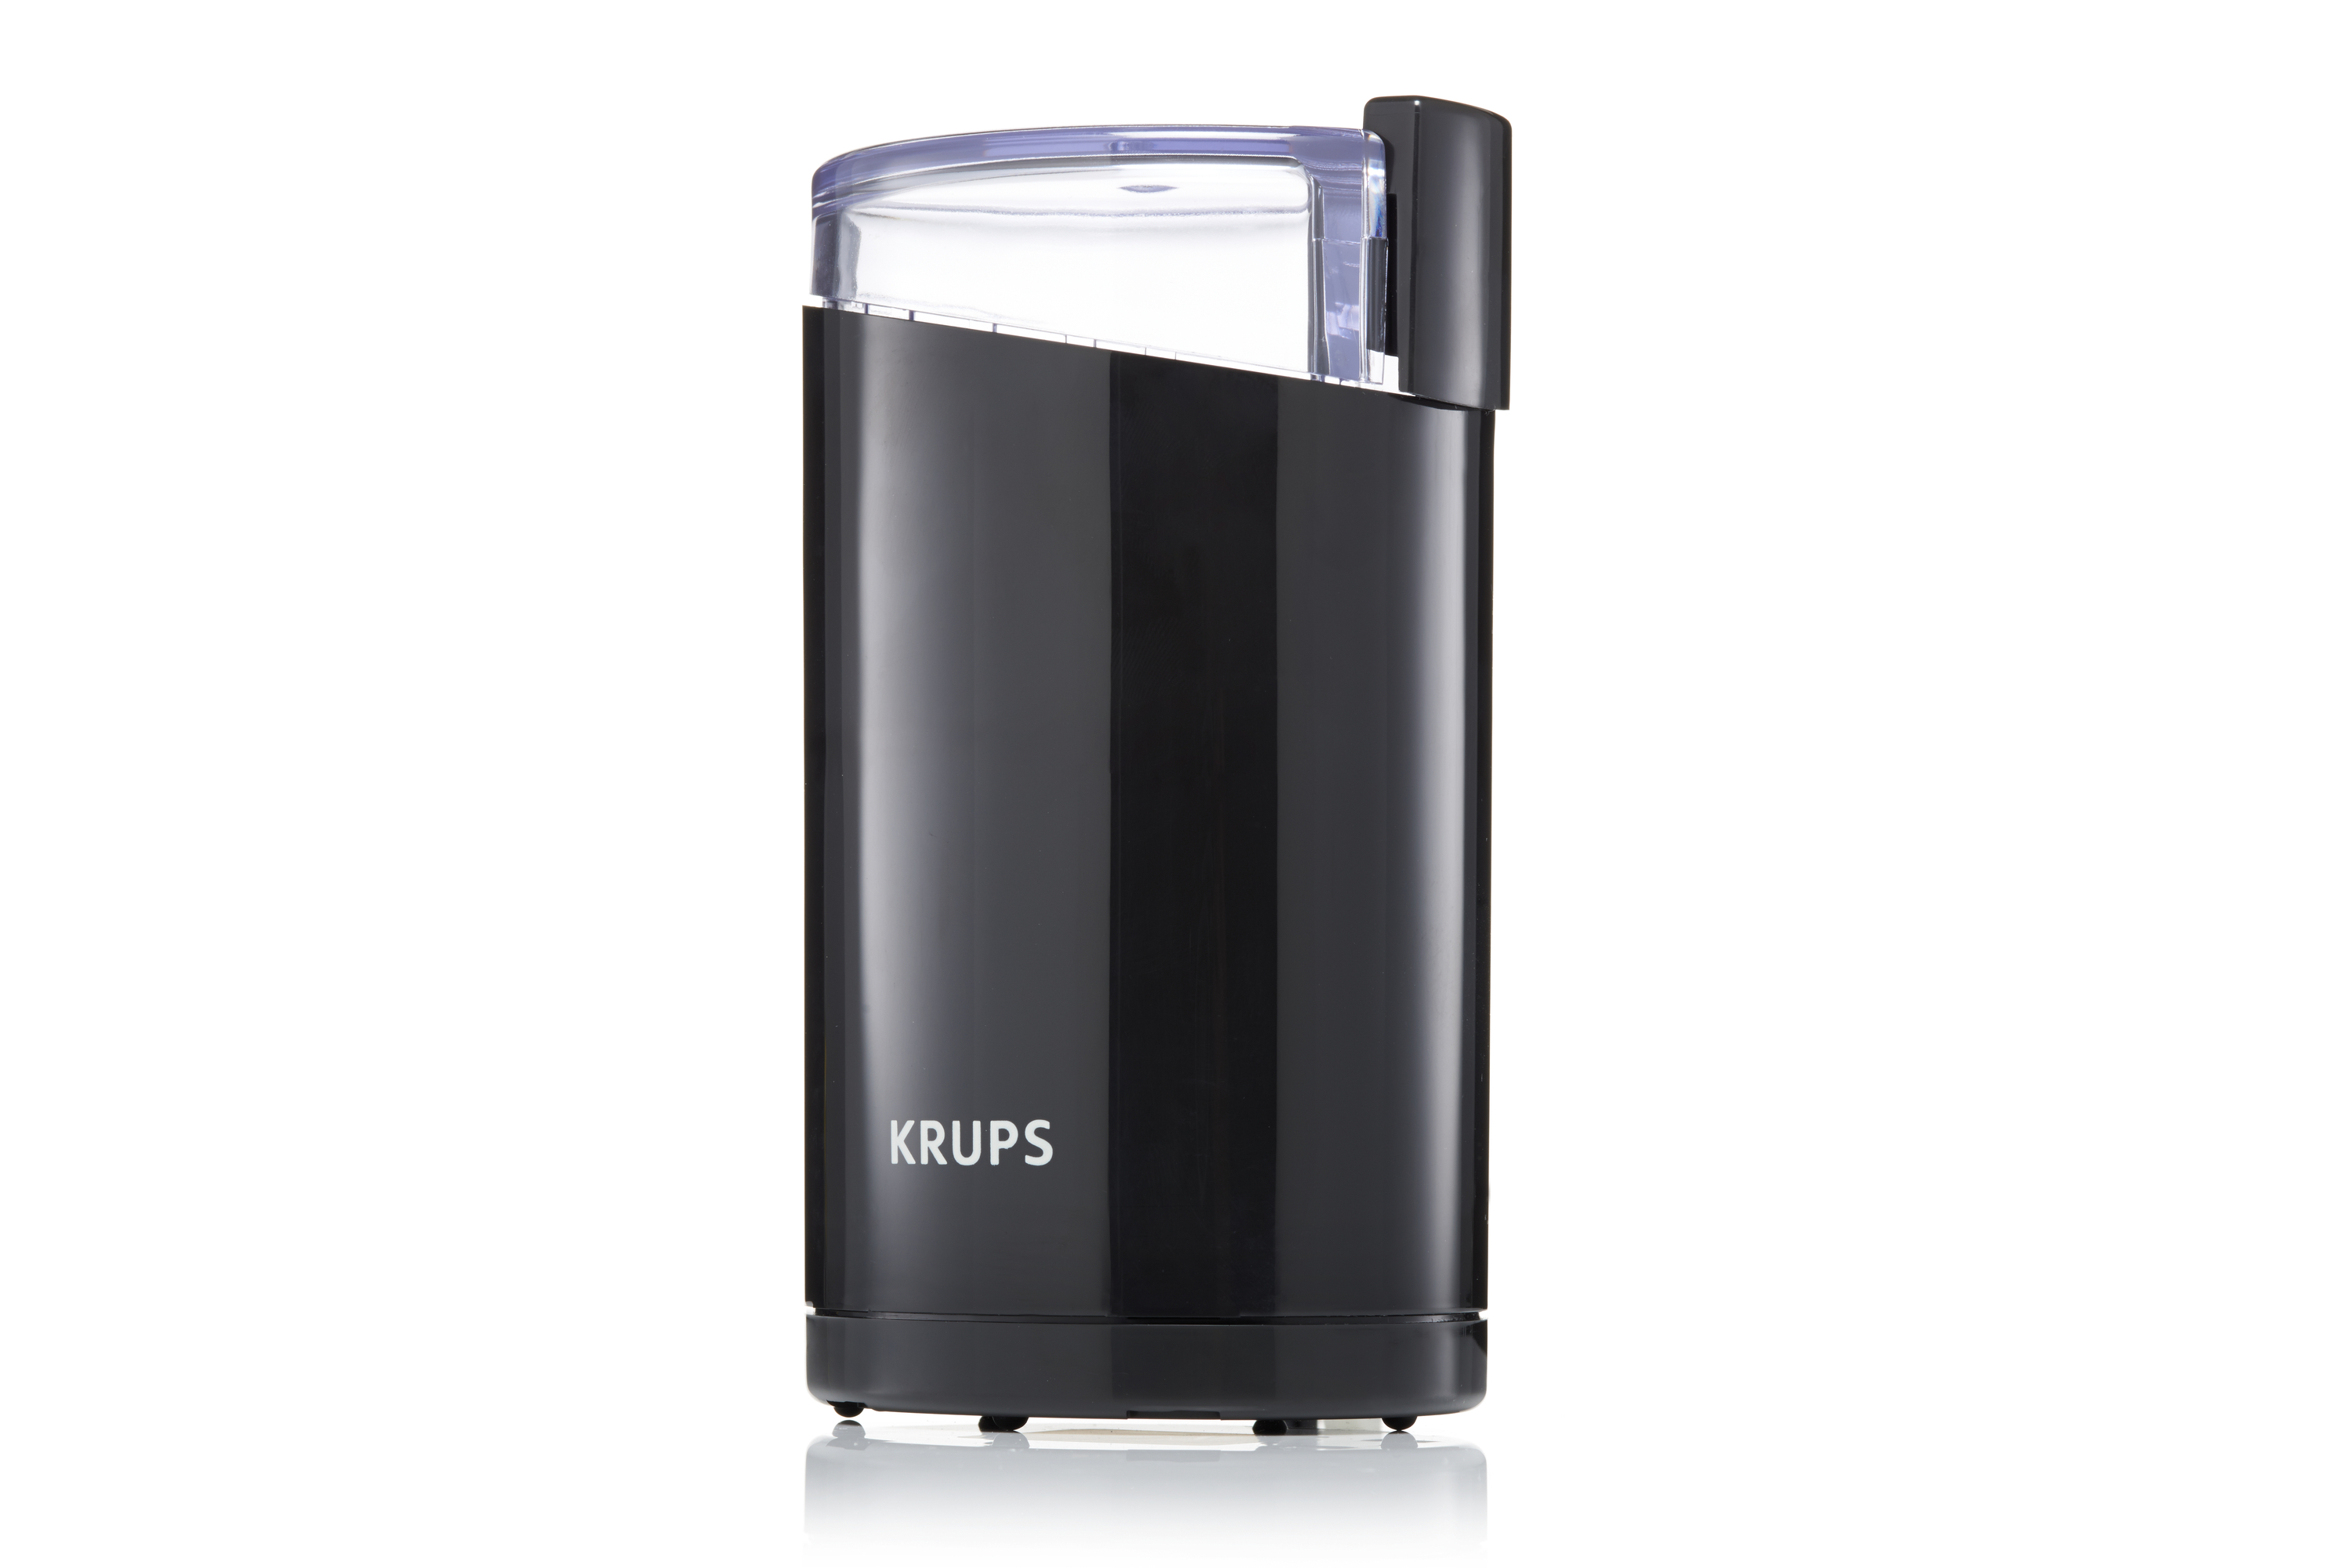 KRUPS New Fast Touch Electric Coffee and Spice Grinder with Stainless Steel Blades, Black - image 1 of 7